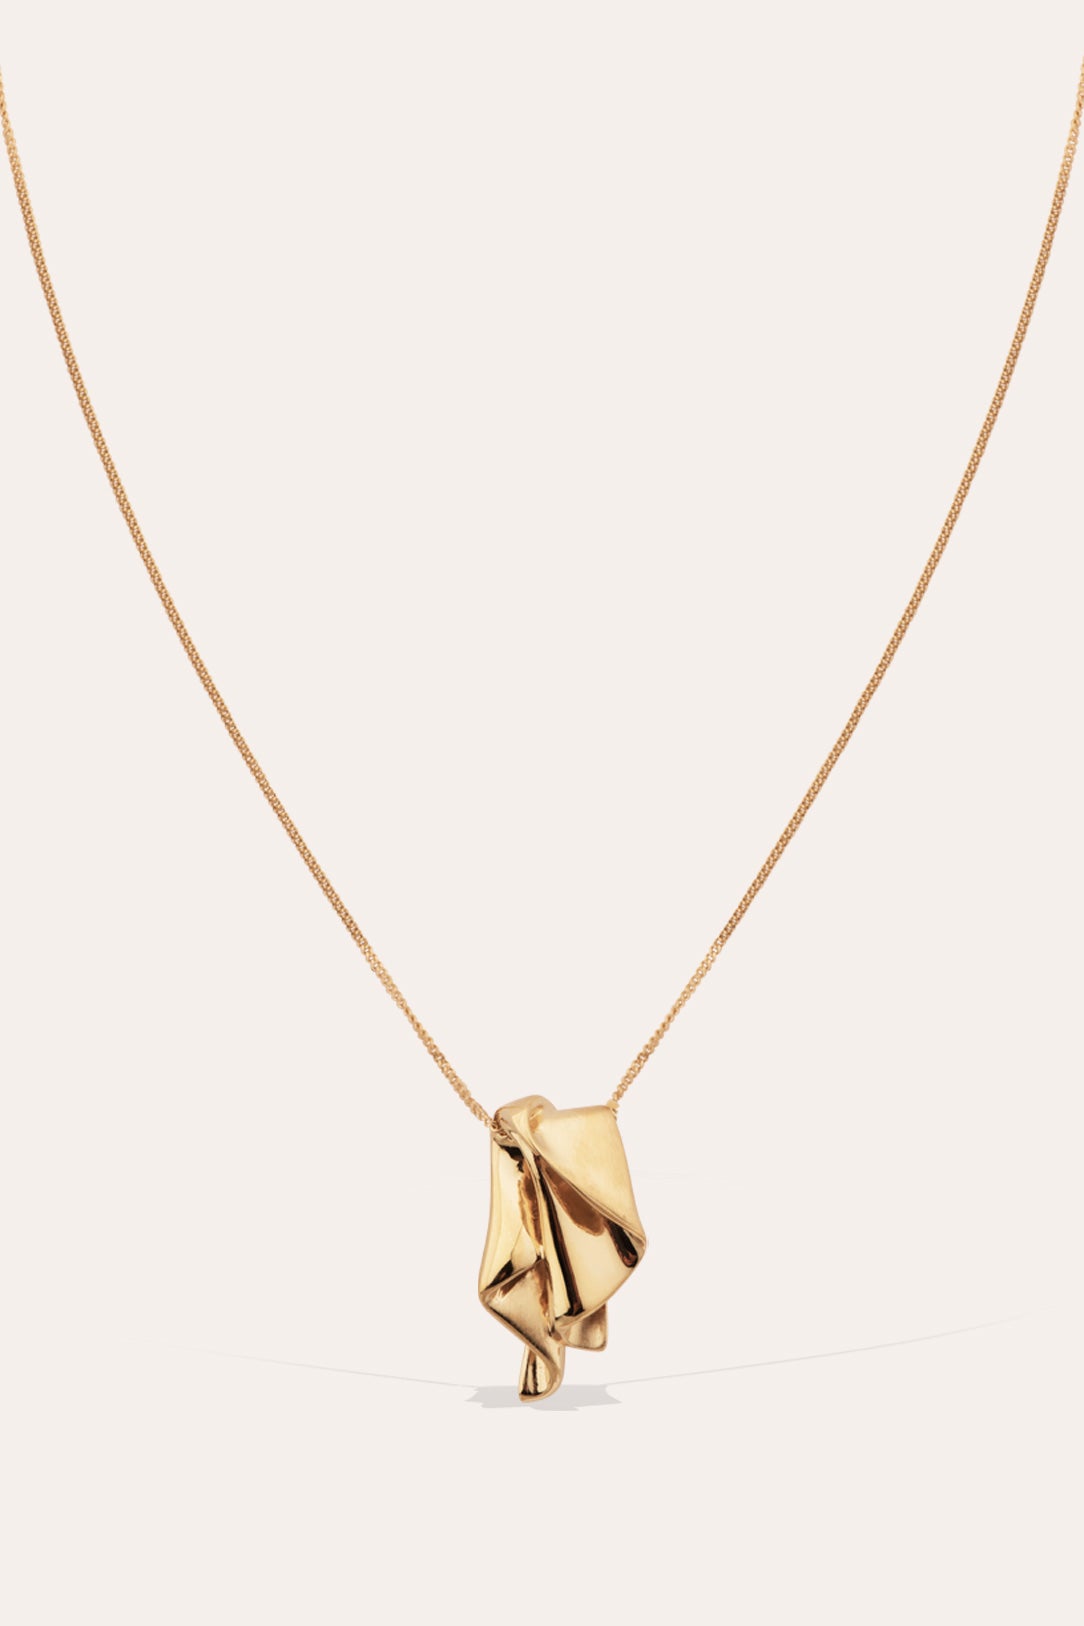 The Second Great Cowboy Strike - Gold Vermeil Pendant | Completedworks